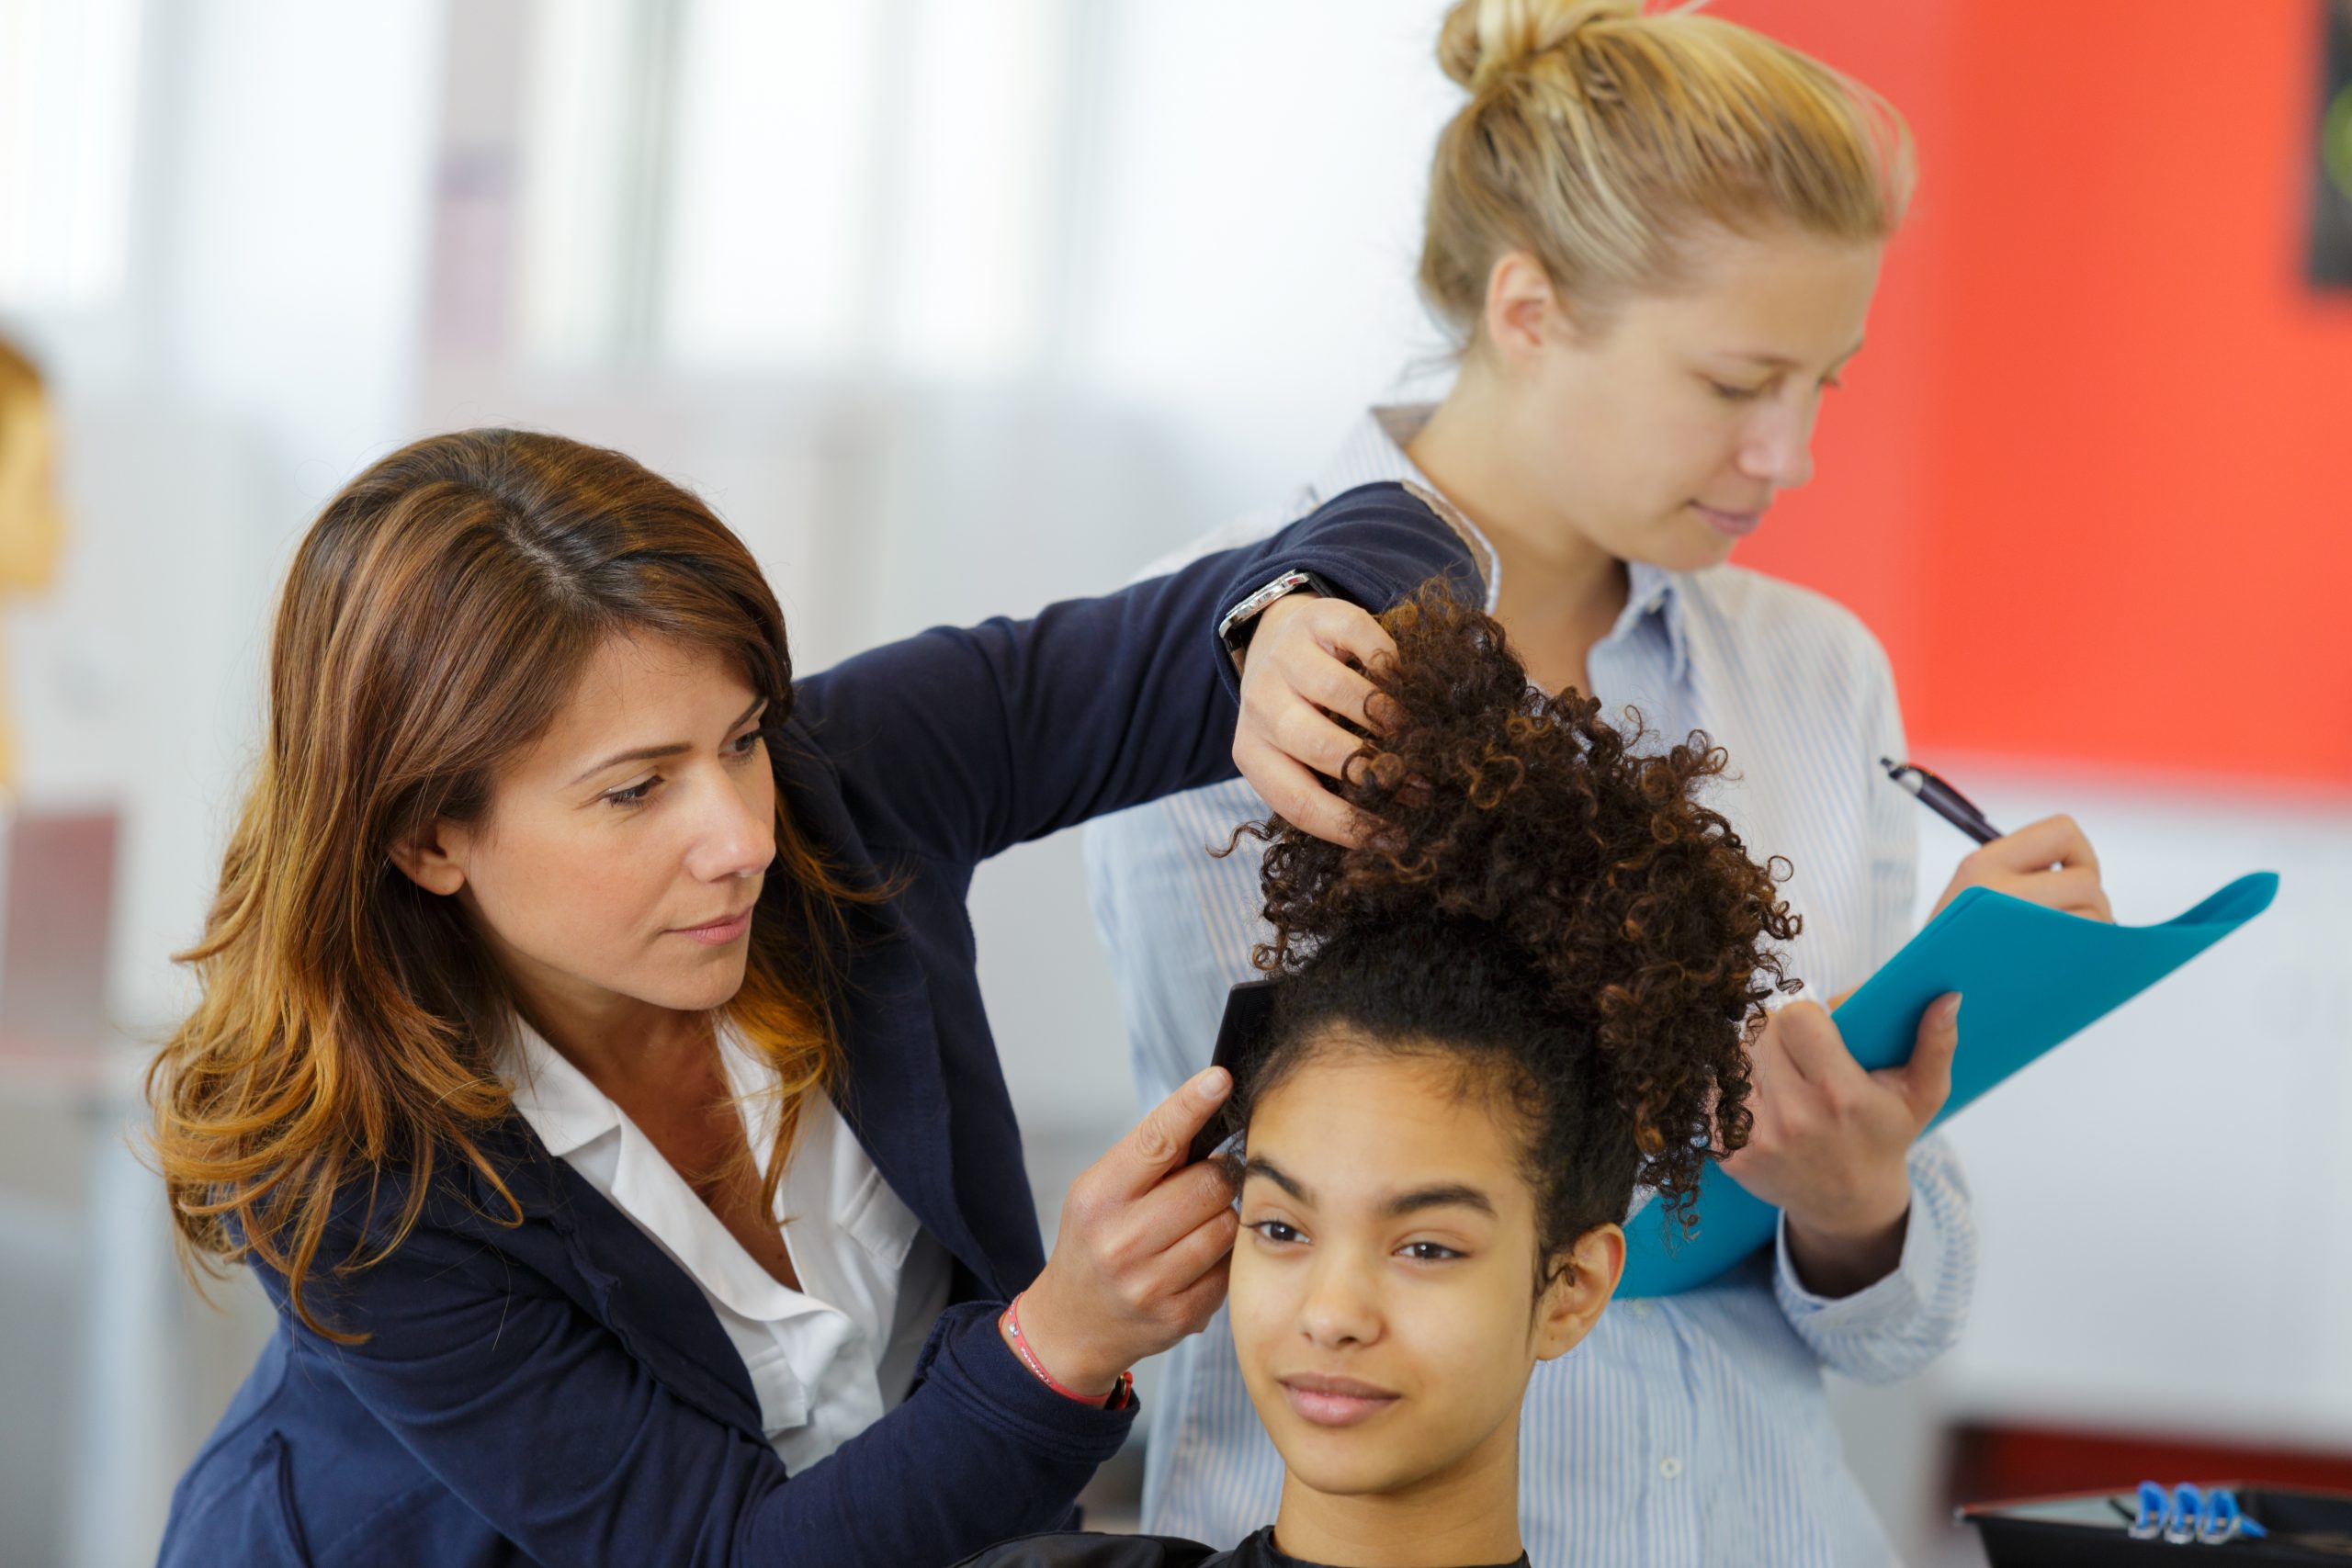 Should I Enroll in Cosmetology School or a Four-Year College?